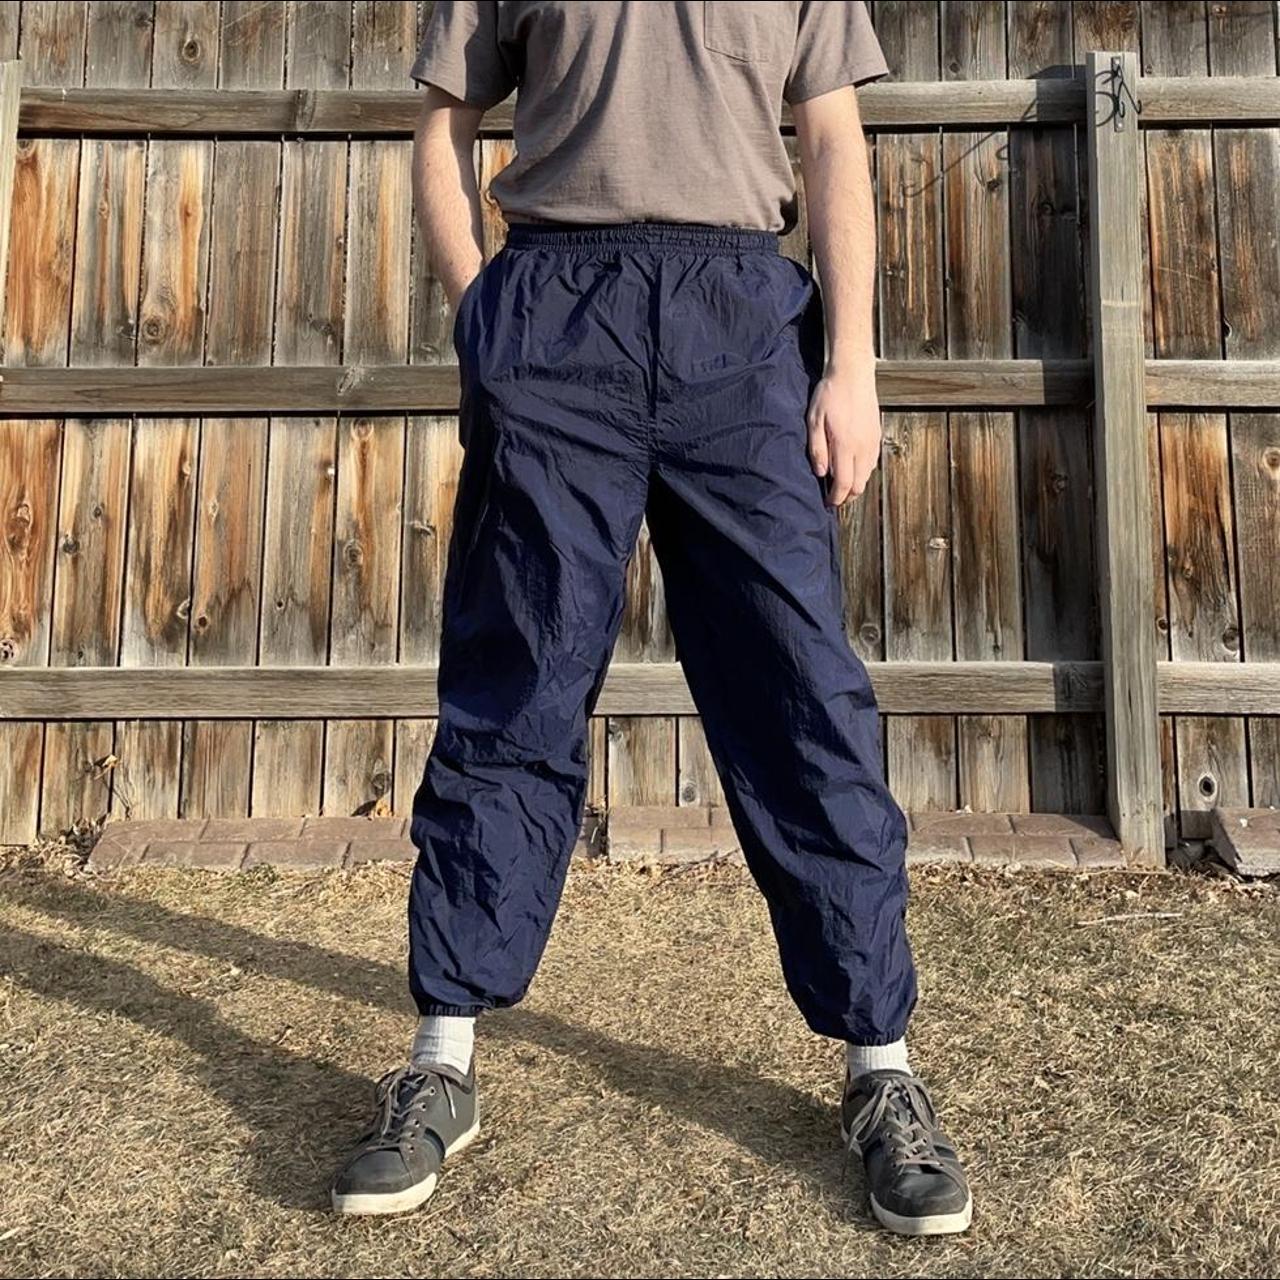 Vintage 90s navy blue lined nylon track pants. Great